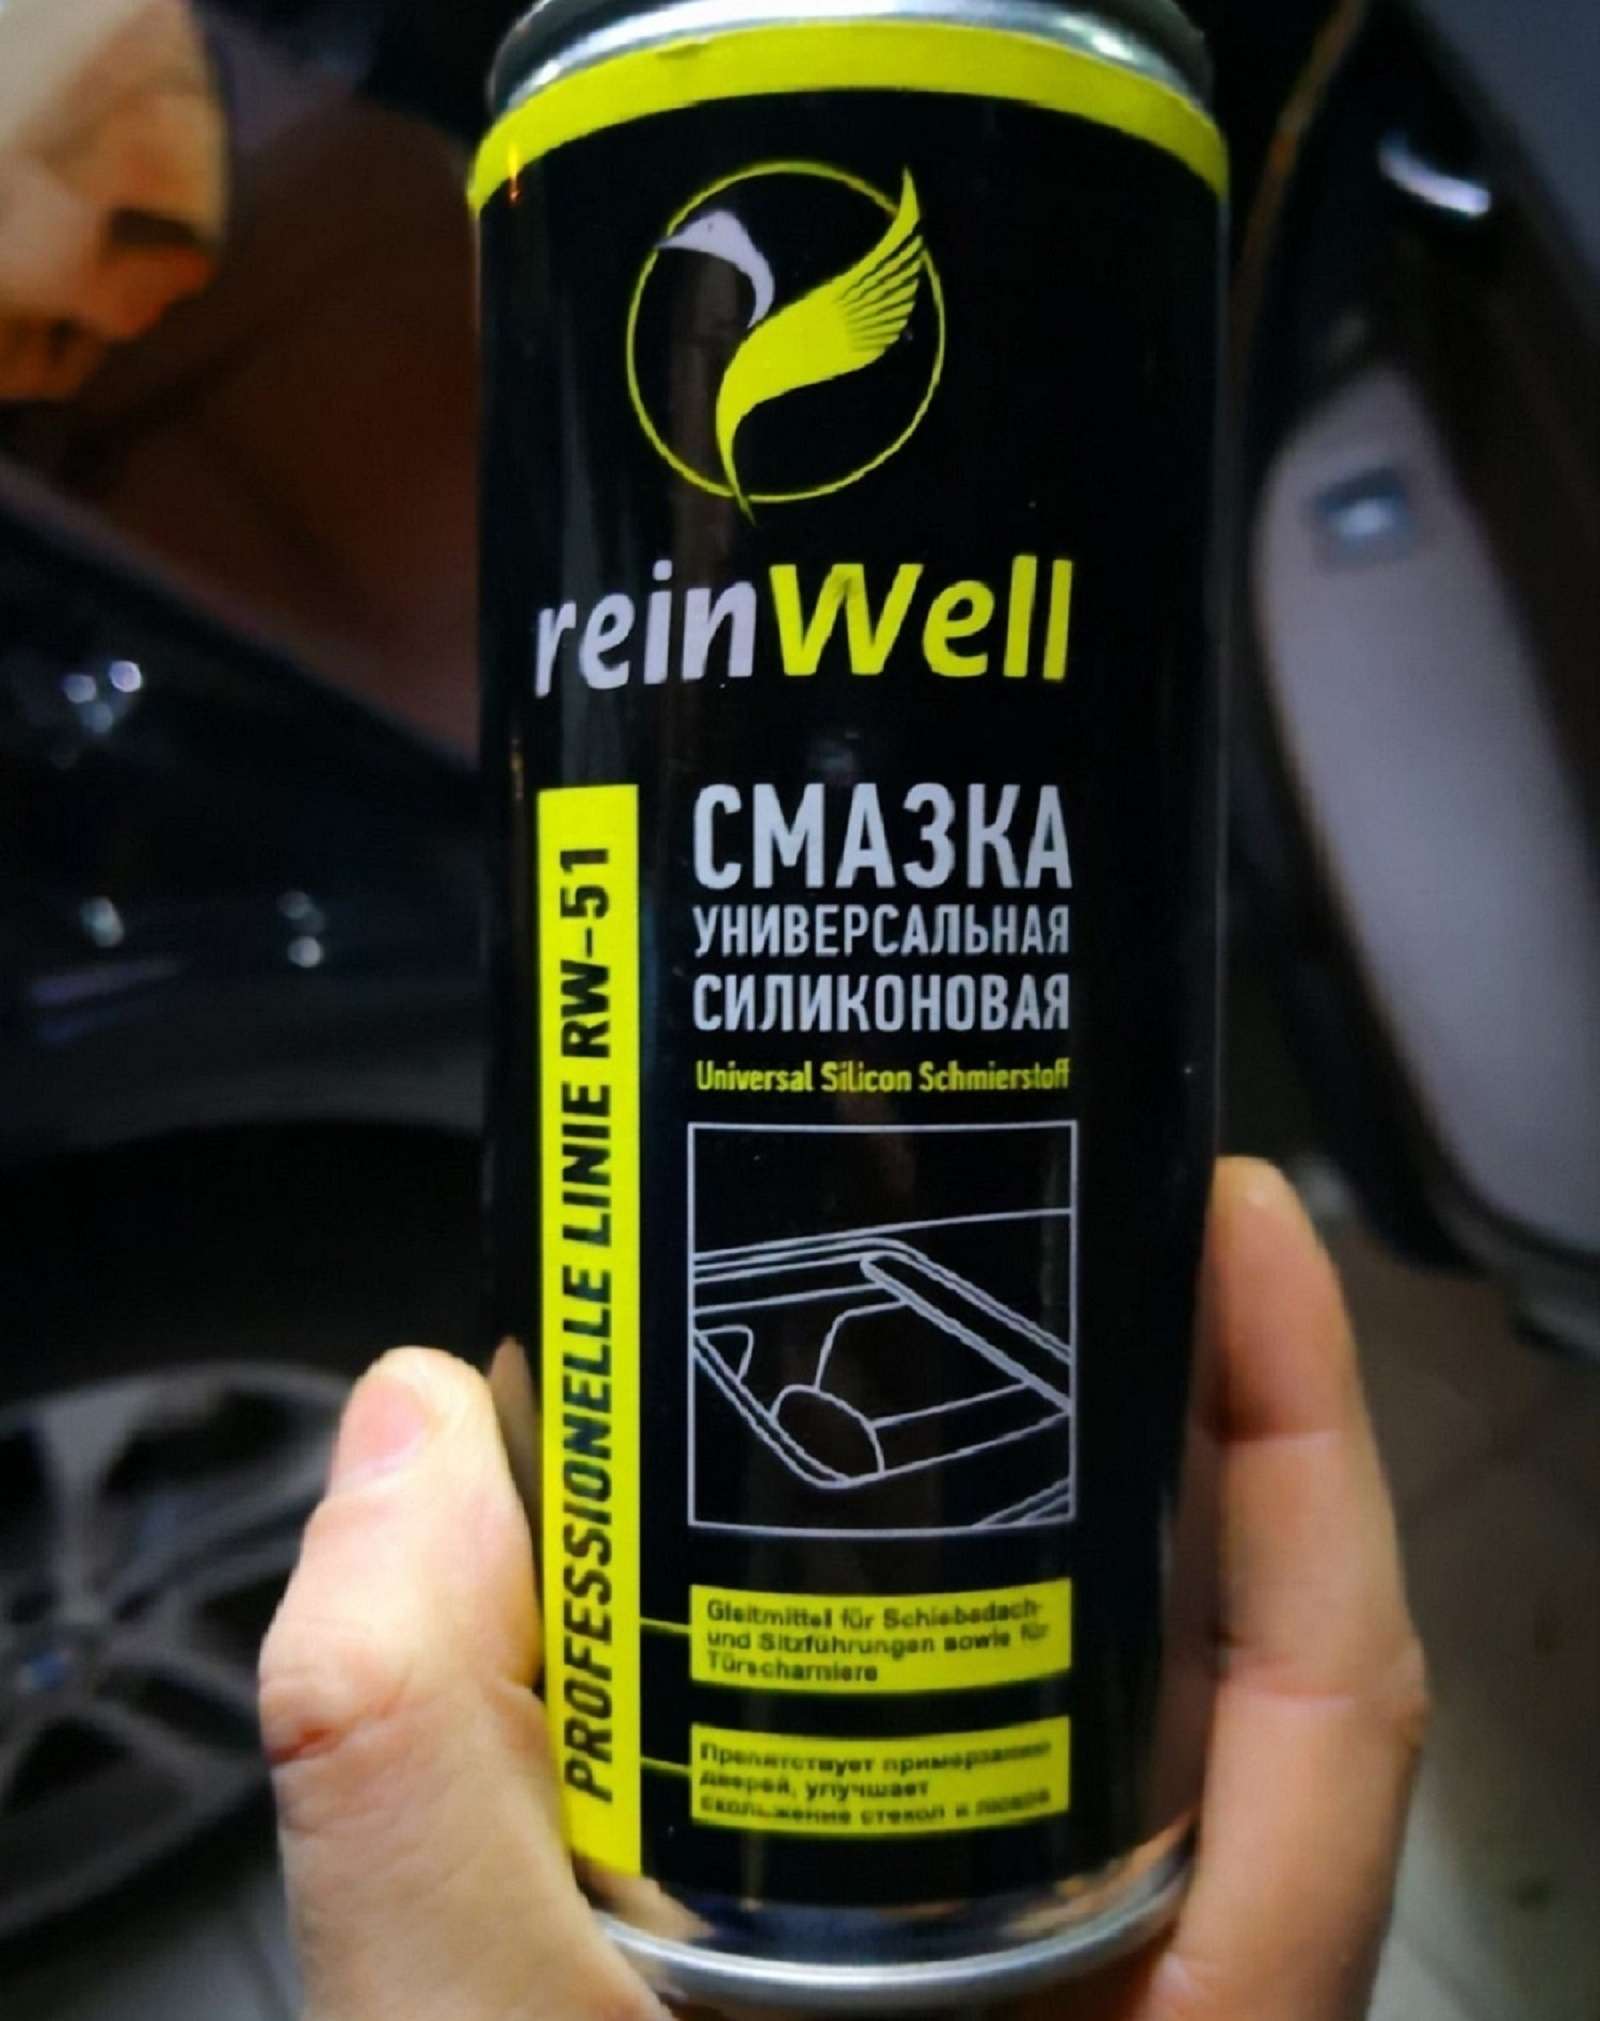 Help yourself: how to save on car maintenance using car chemicals - photo 1342221